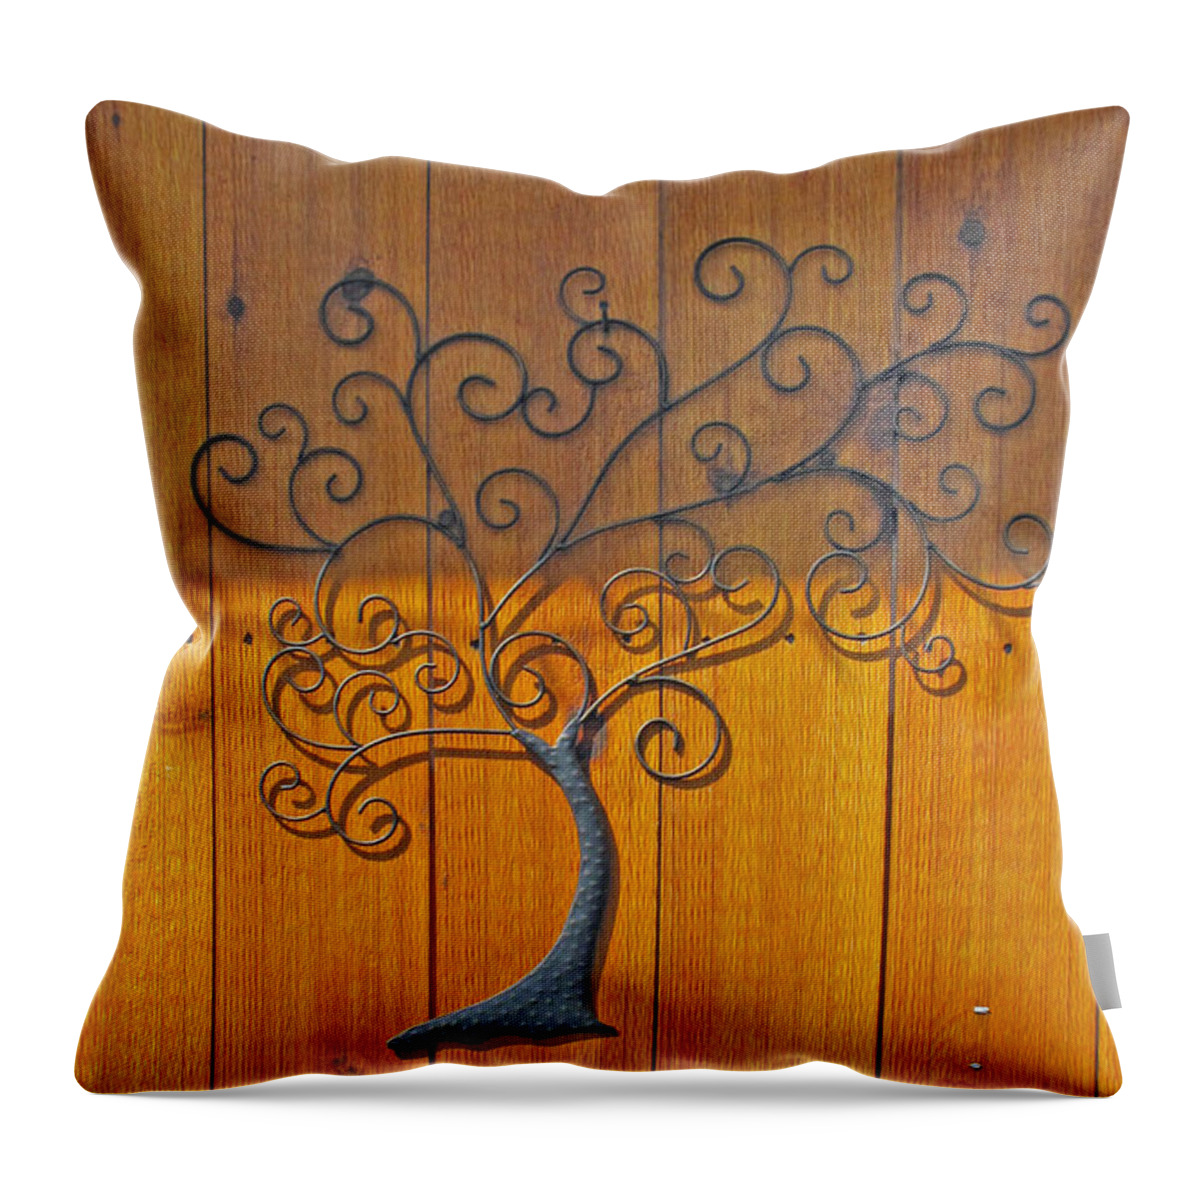 Swirls Throw Pillow featuring the photograph Family Tree by Barbara McDevitt